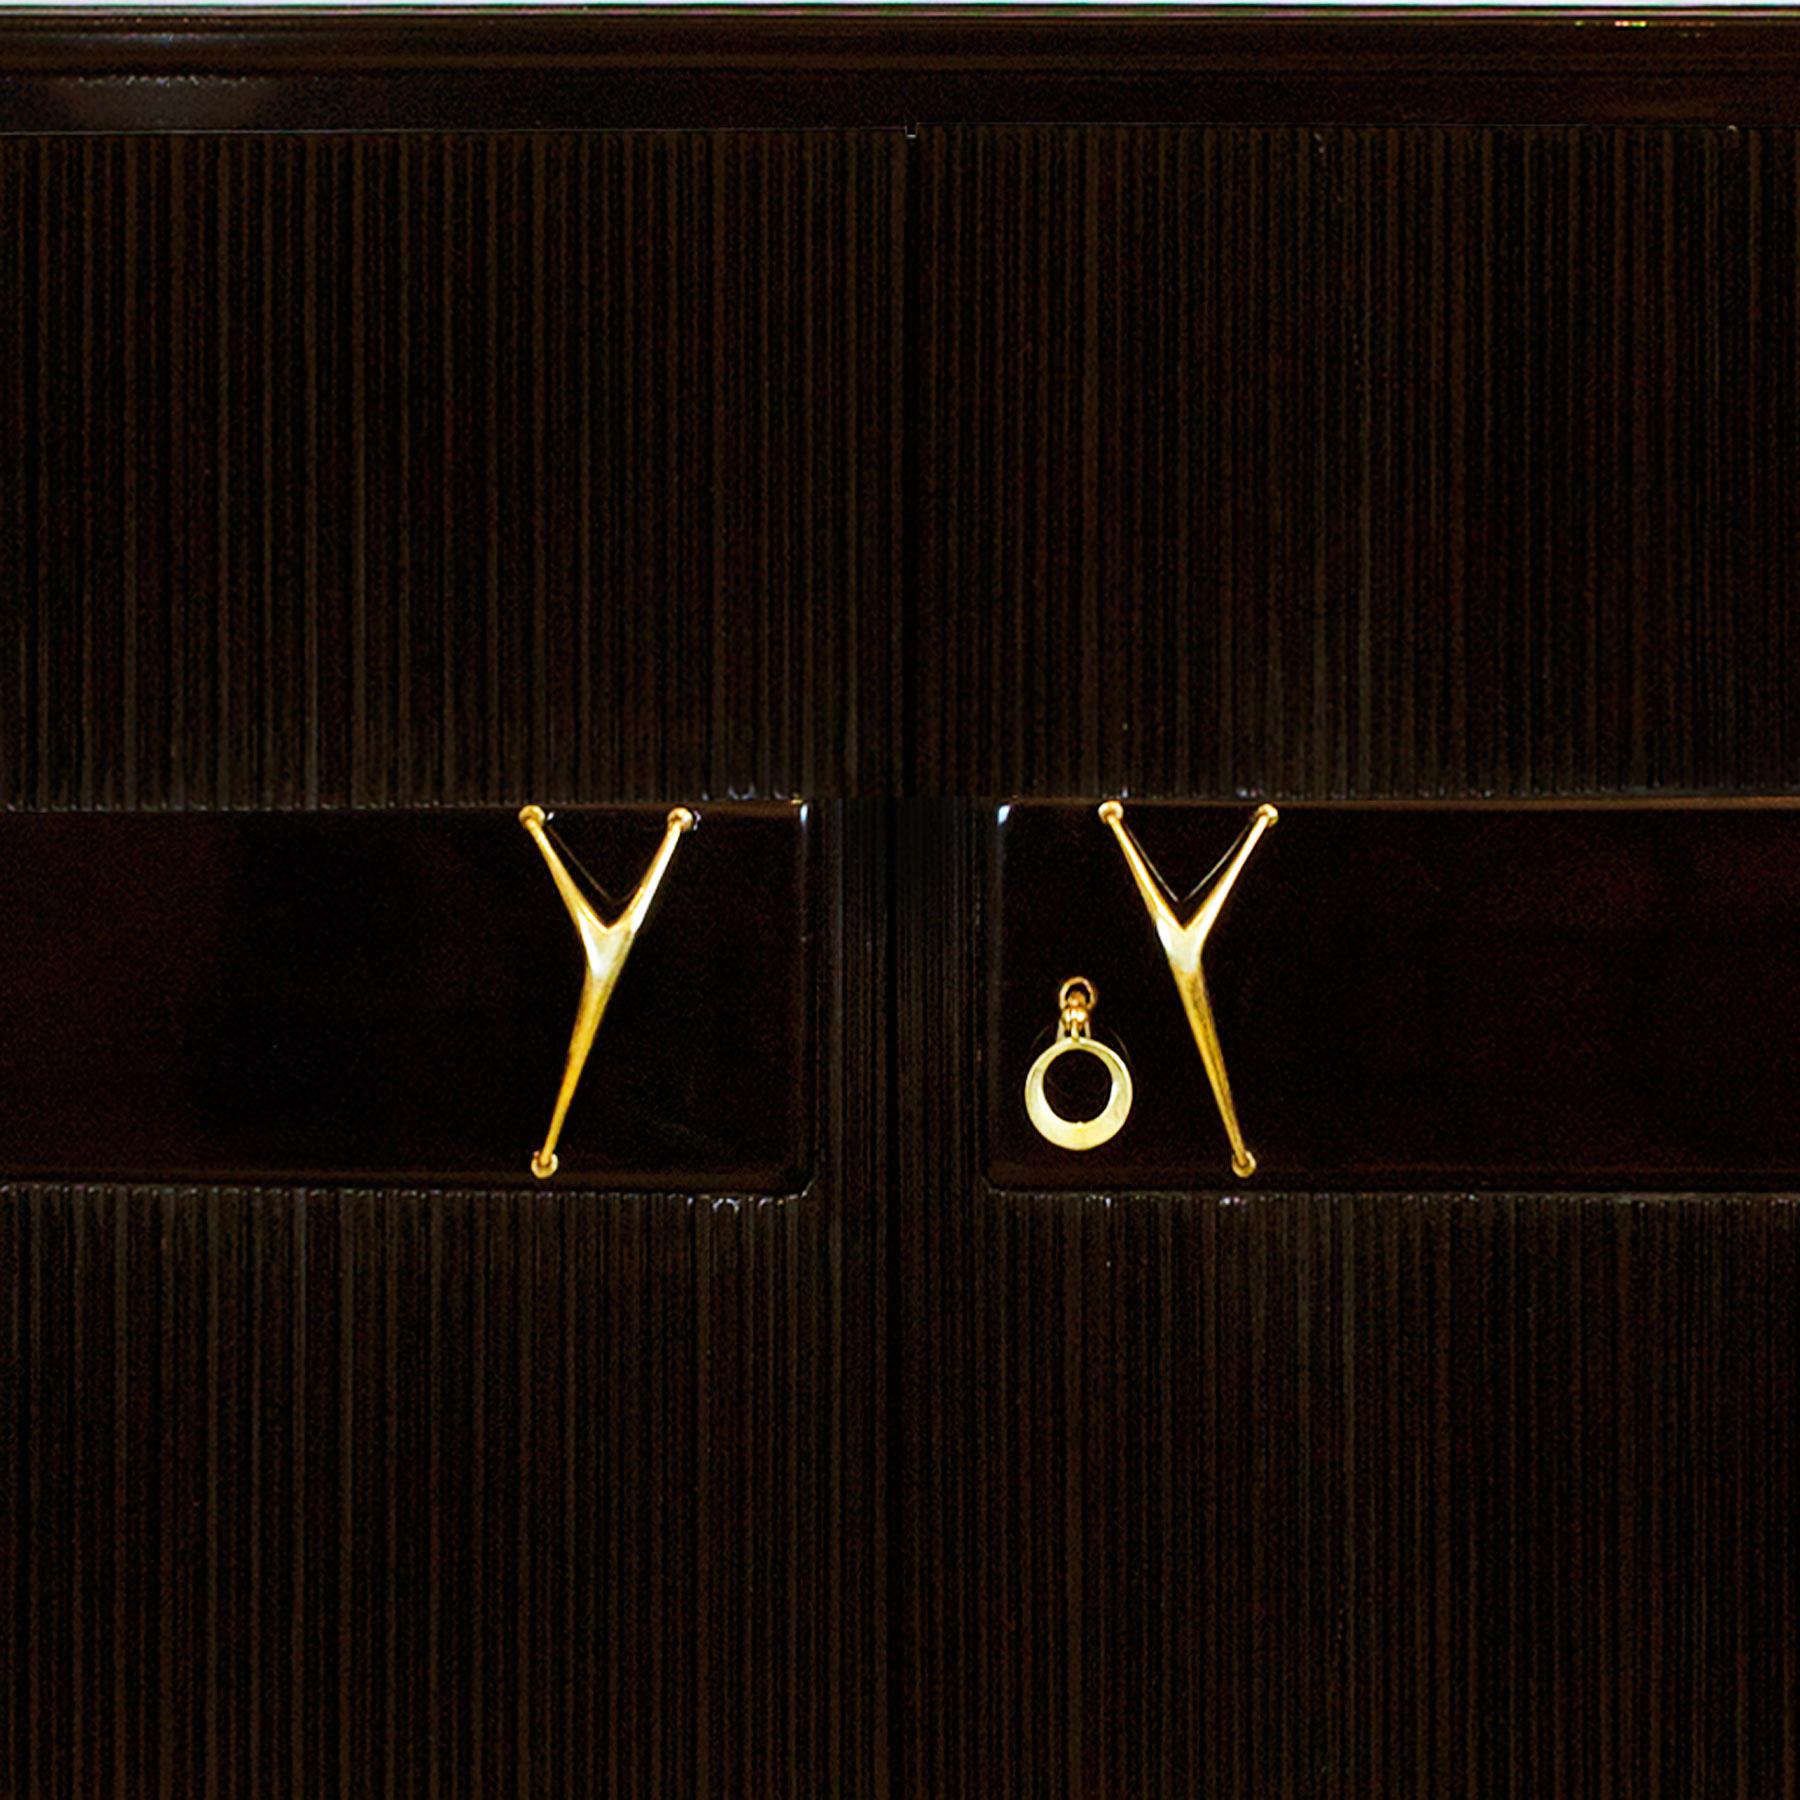 Mid-20th Century 1945-1950 Sideboard in the Style of Ico Parisi, Mahogany, Bronze, Brass, Italy